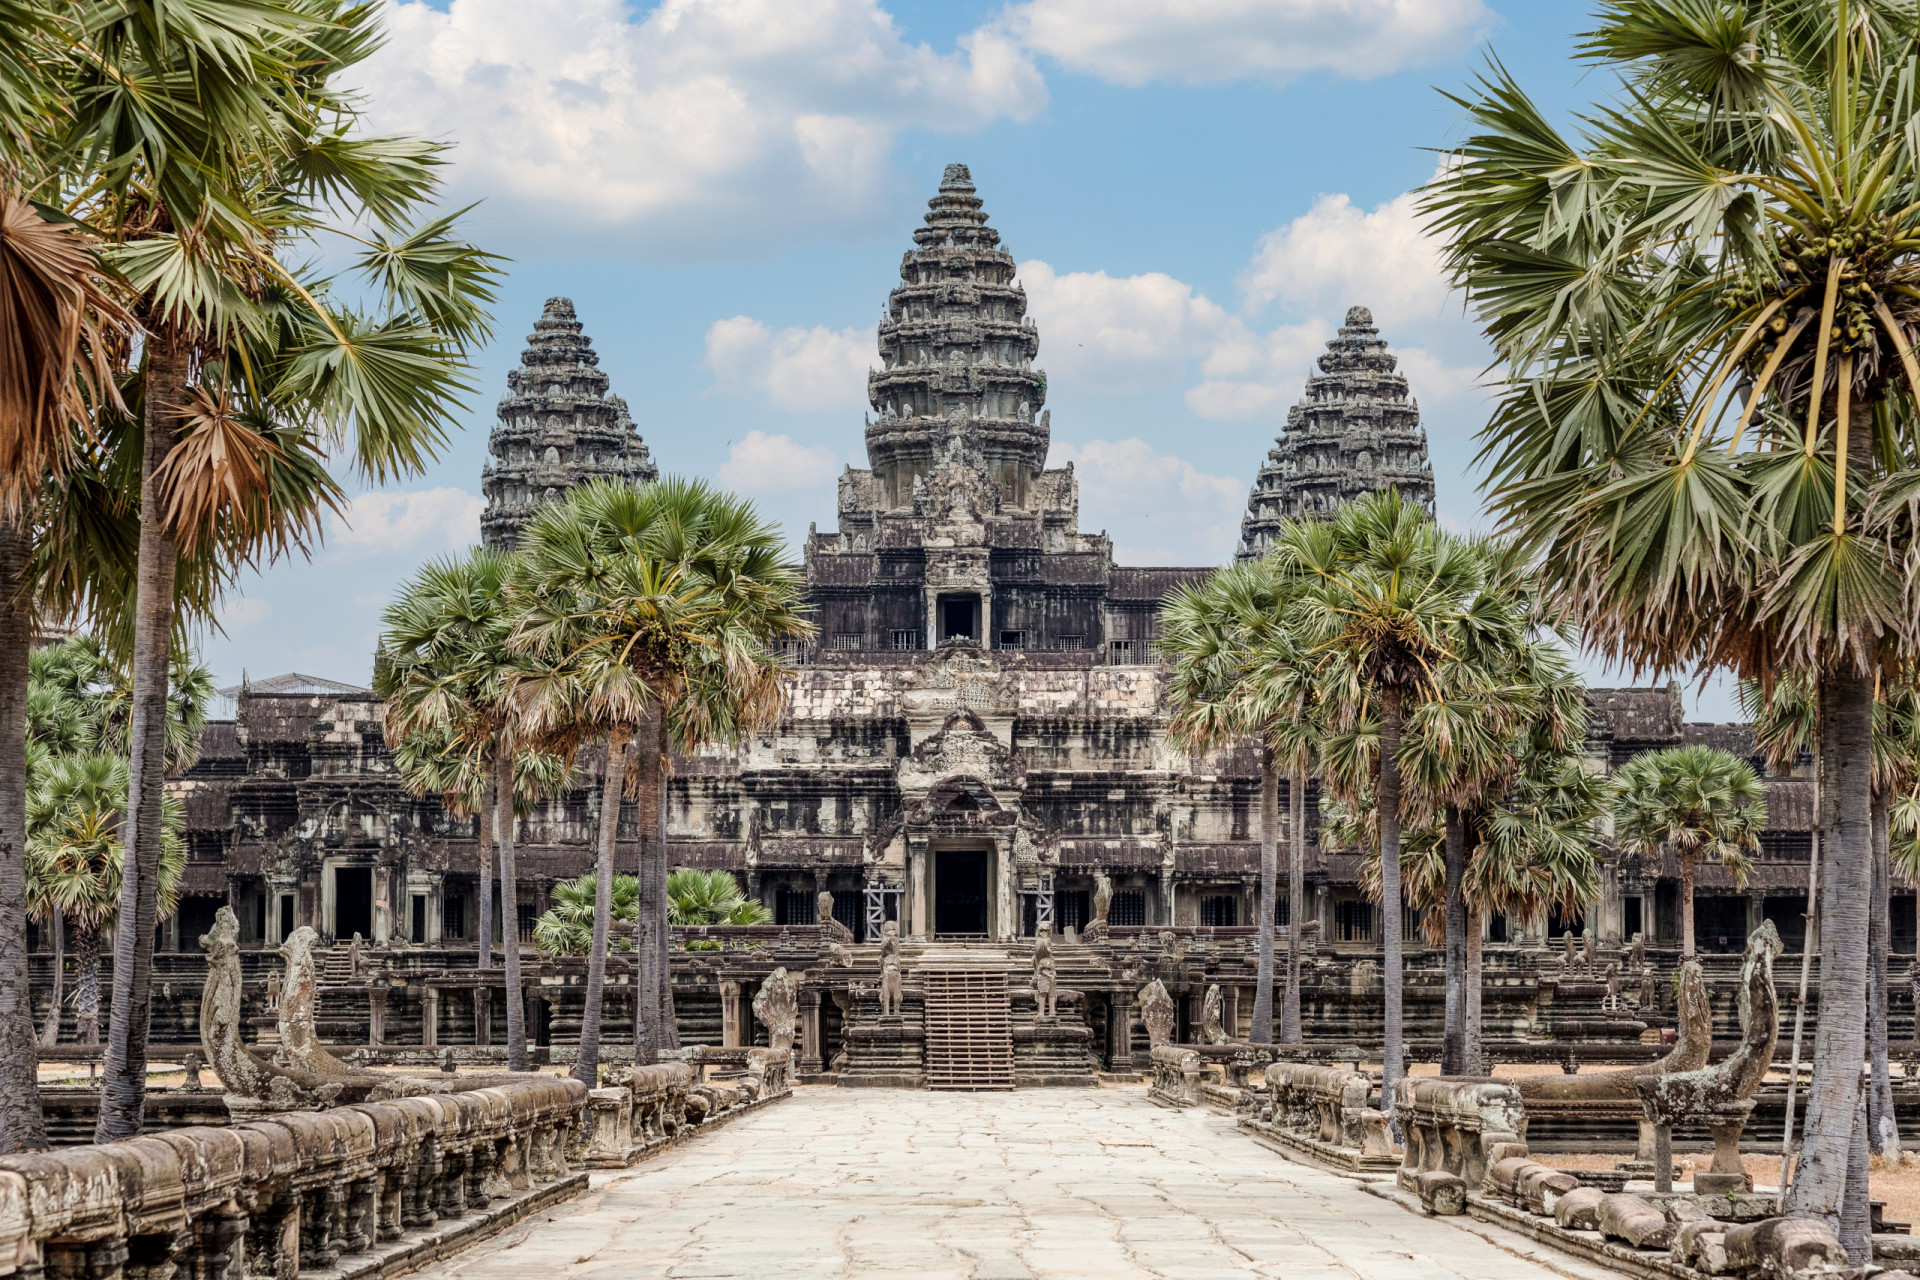 <p>Maintenance on specific temples within the famous Angkor Wat complex will restrict access. This is being done as part of ongoing efforts to preserve this ancient site.</p><p>You may also like:<a href="https://www.starsinsider.com/n/418256?utm_source=msn.com&utm_medium=display&utm_campaign=referral_description&utm_content=646906en-us"> The fascinating world of Parisian cabarets</a></p>